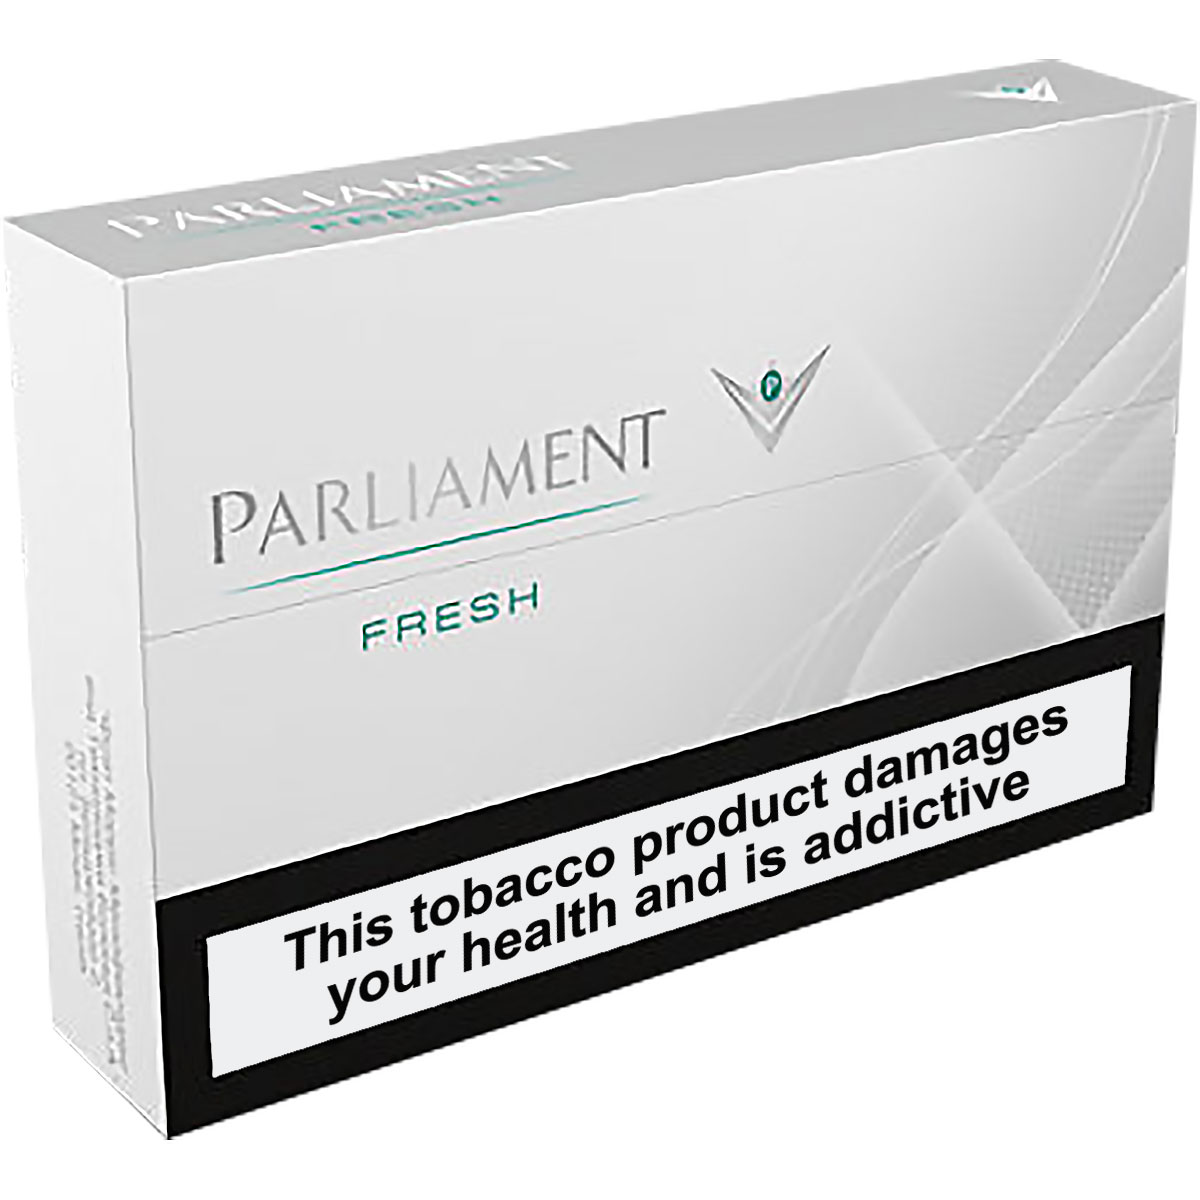 Parliament - Fresh Limited Edition (1 pack)